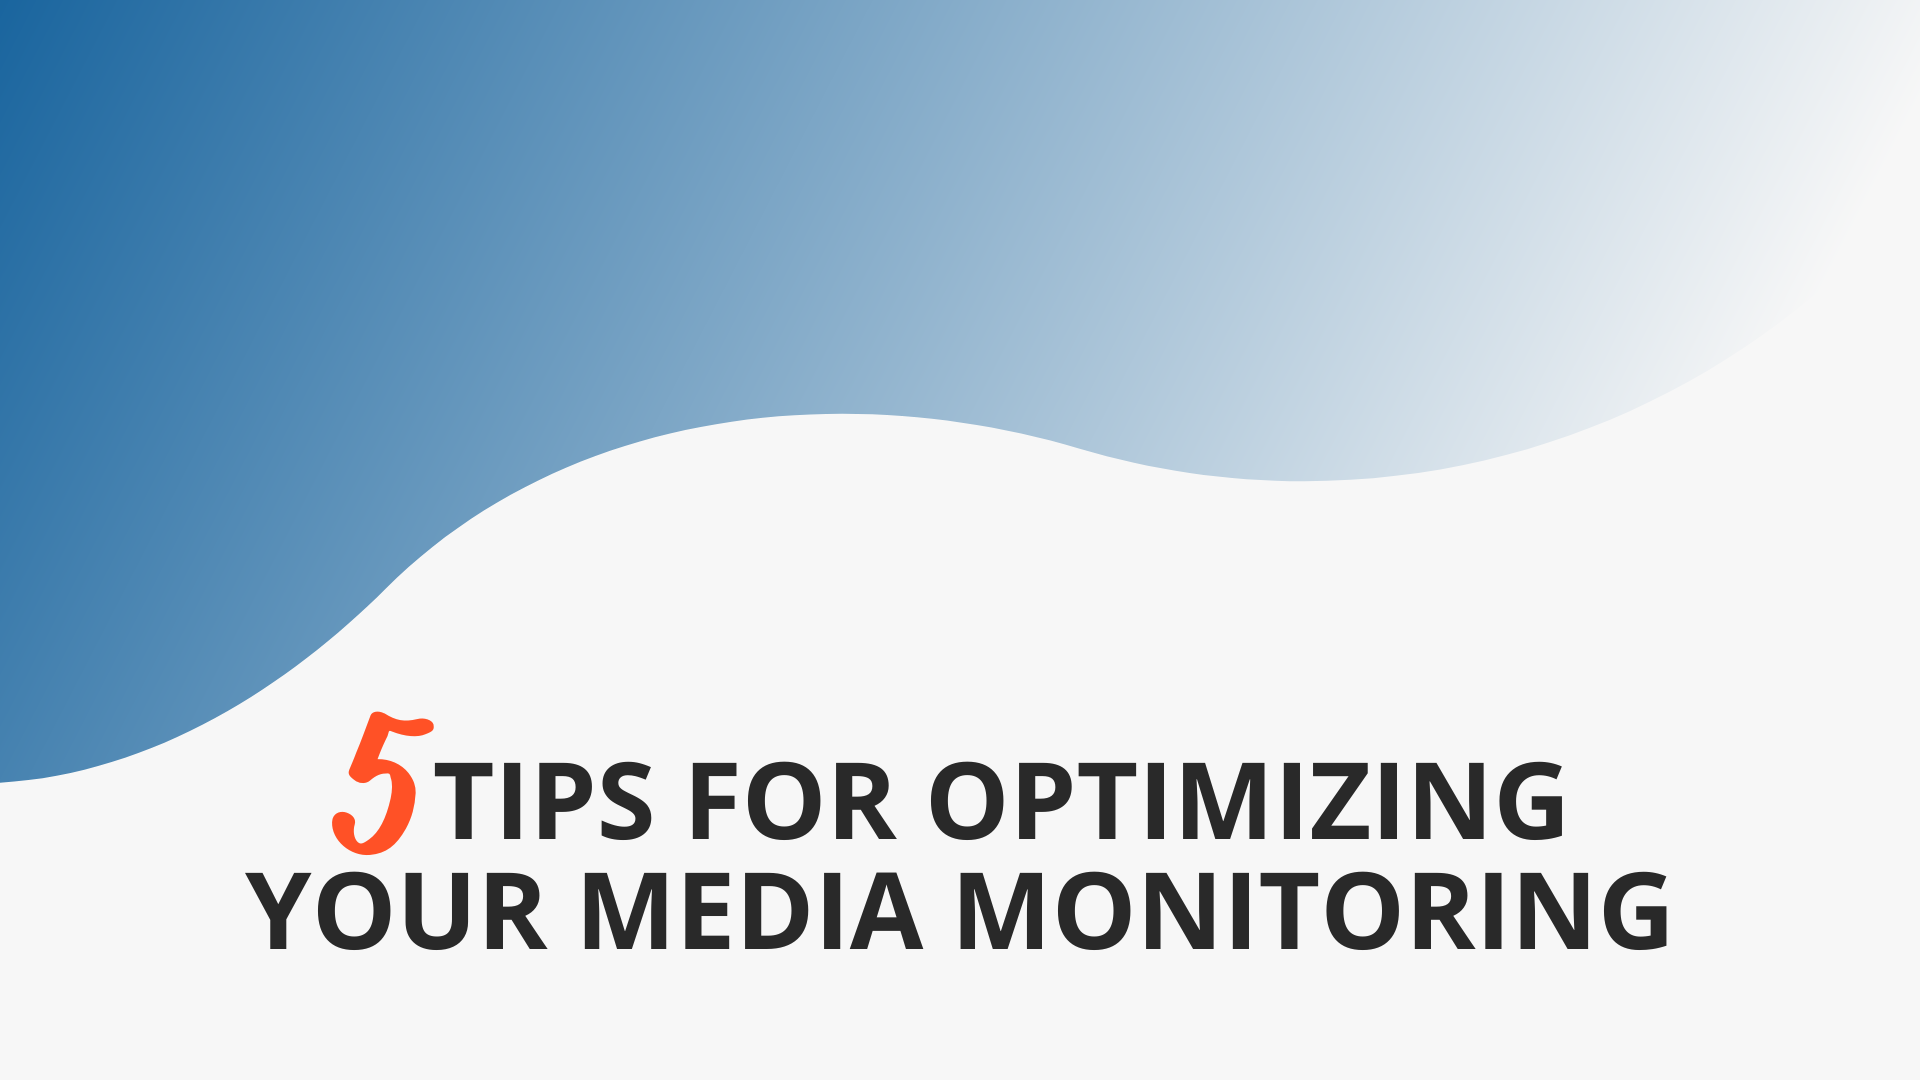 Optimizing your media monitoring: An Agility expert shares tips on how to reduce noise and never miss a mention